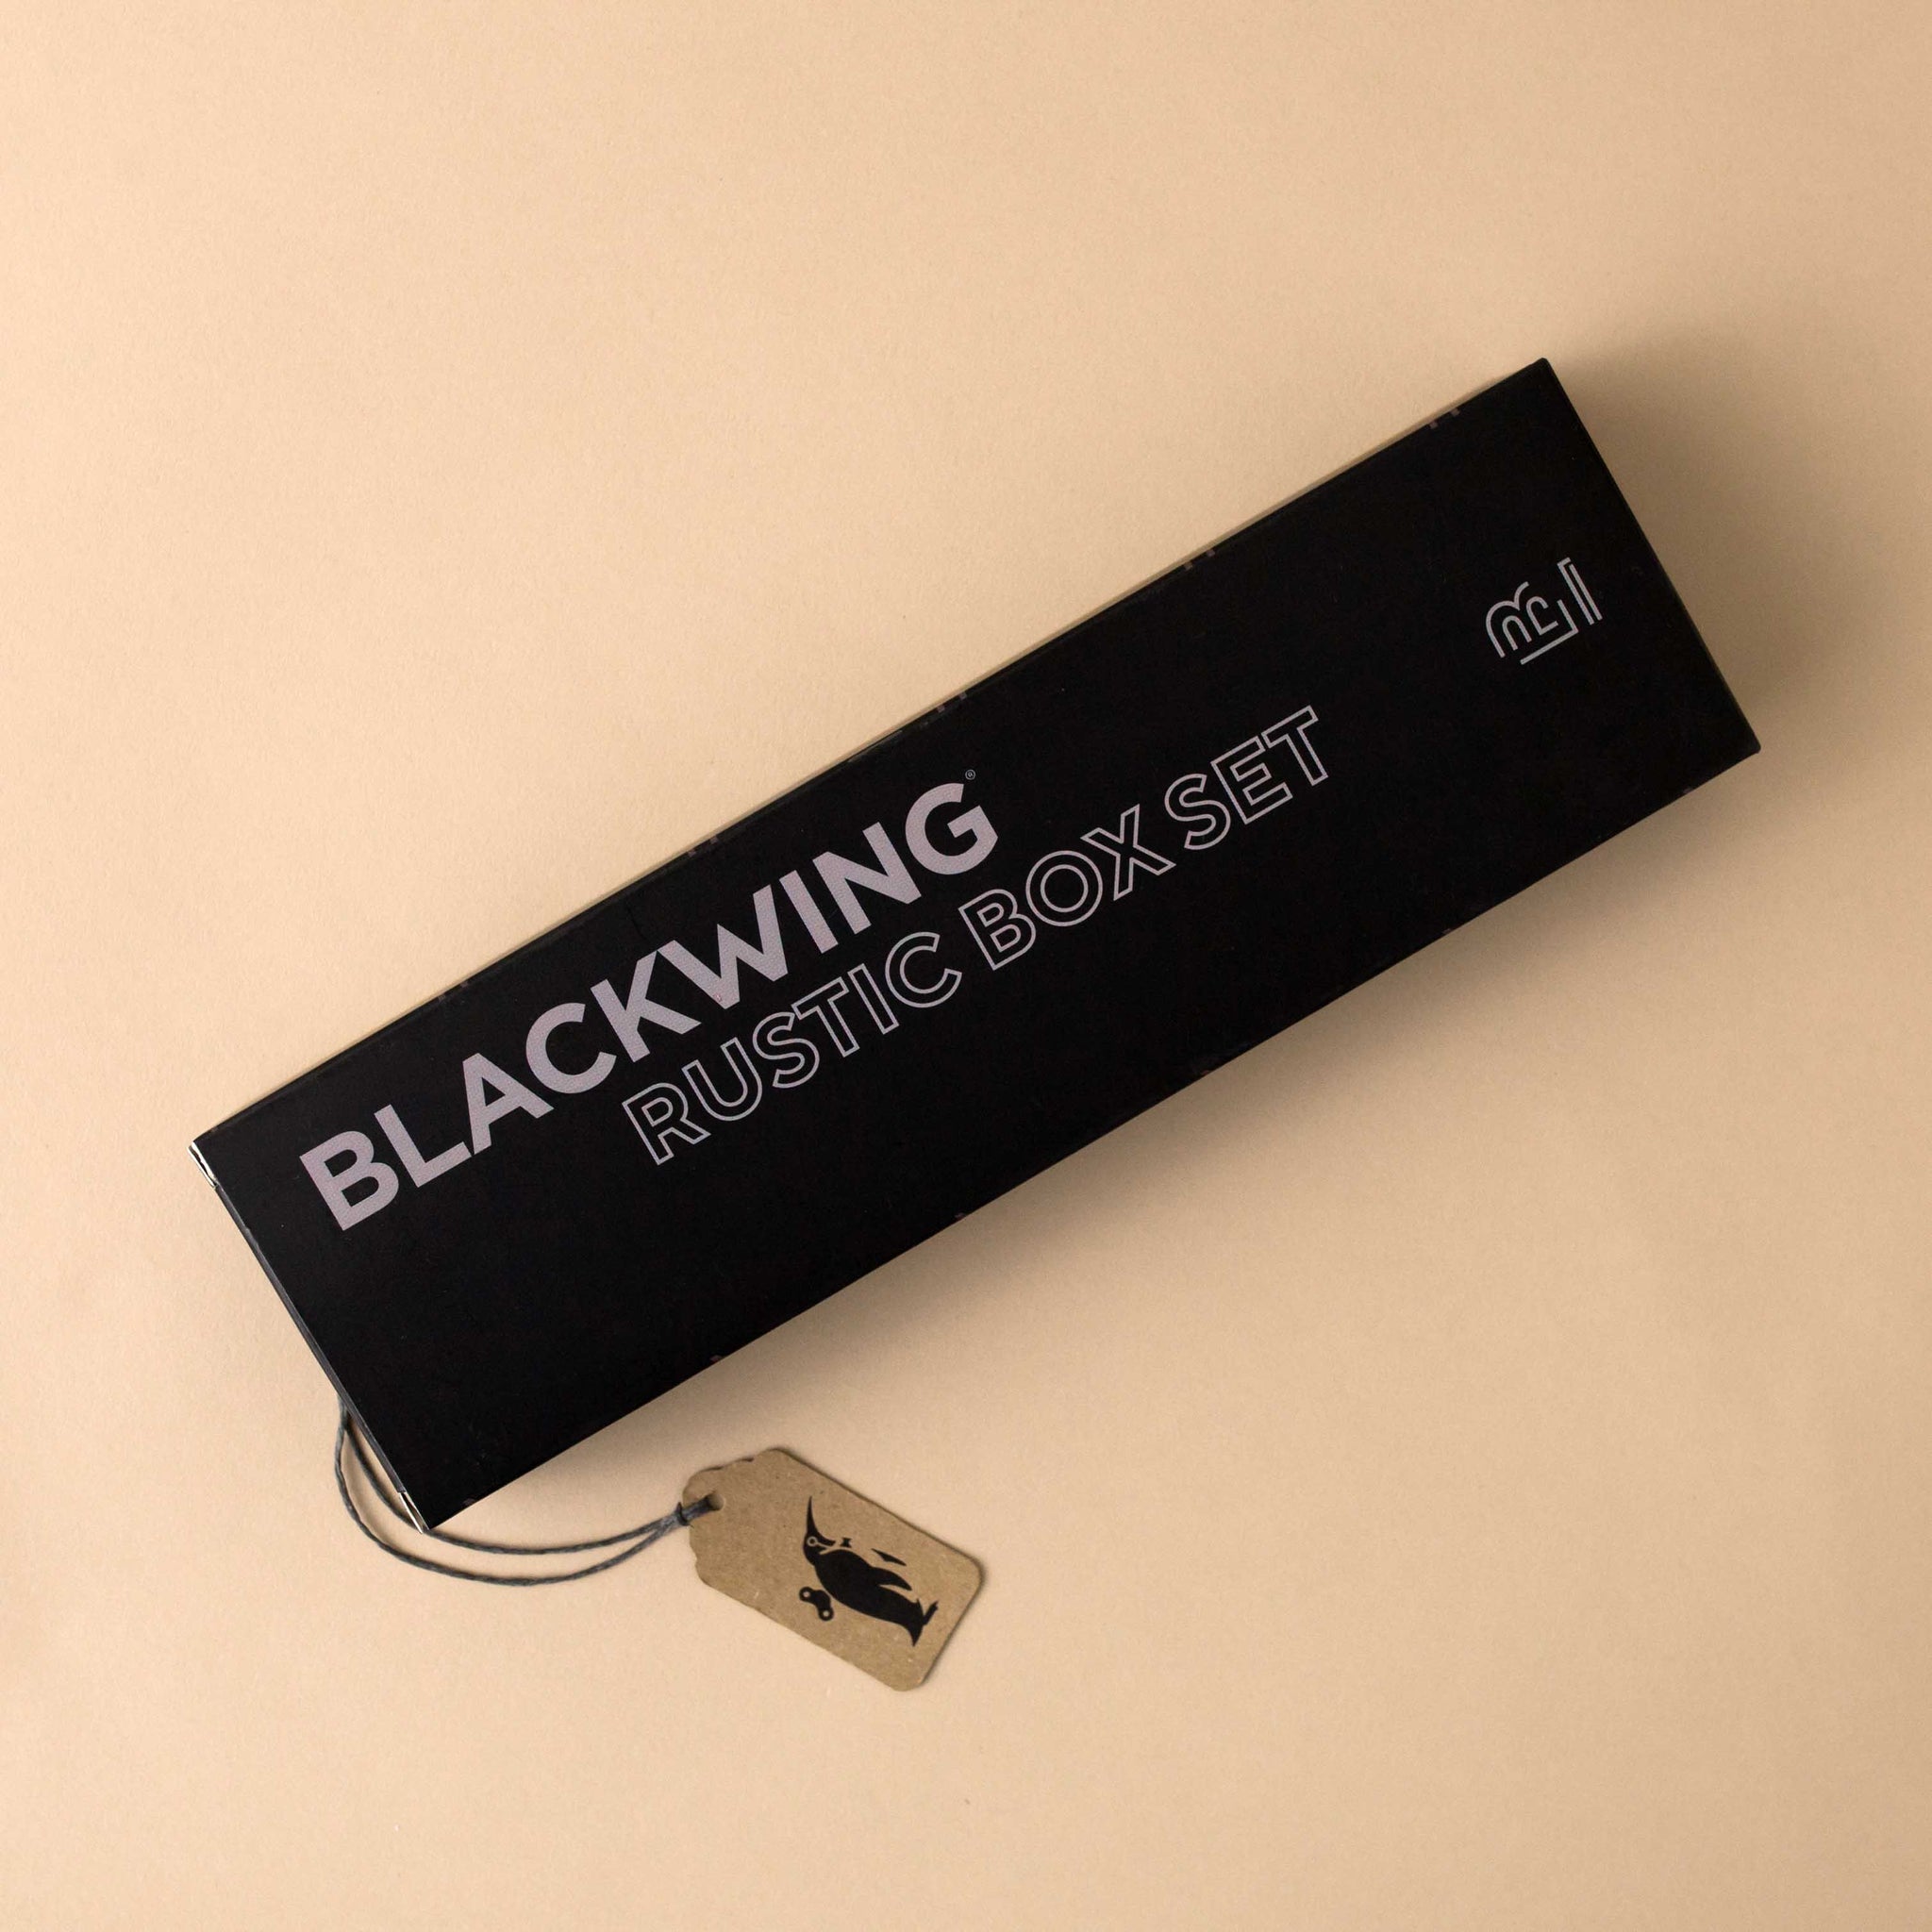 Blackwing Special Edition Gift Set